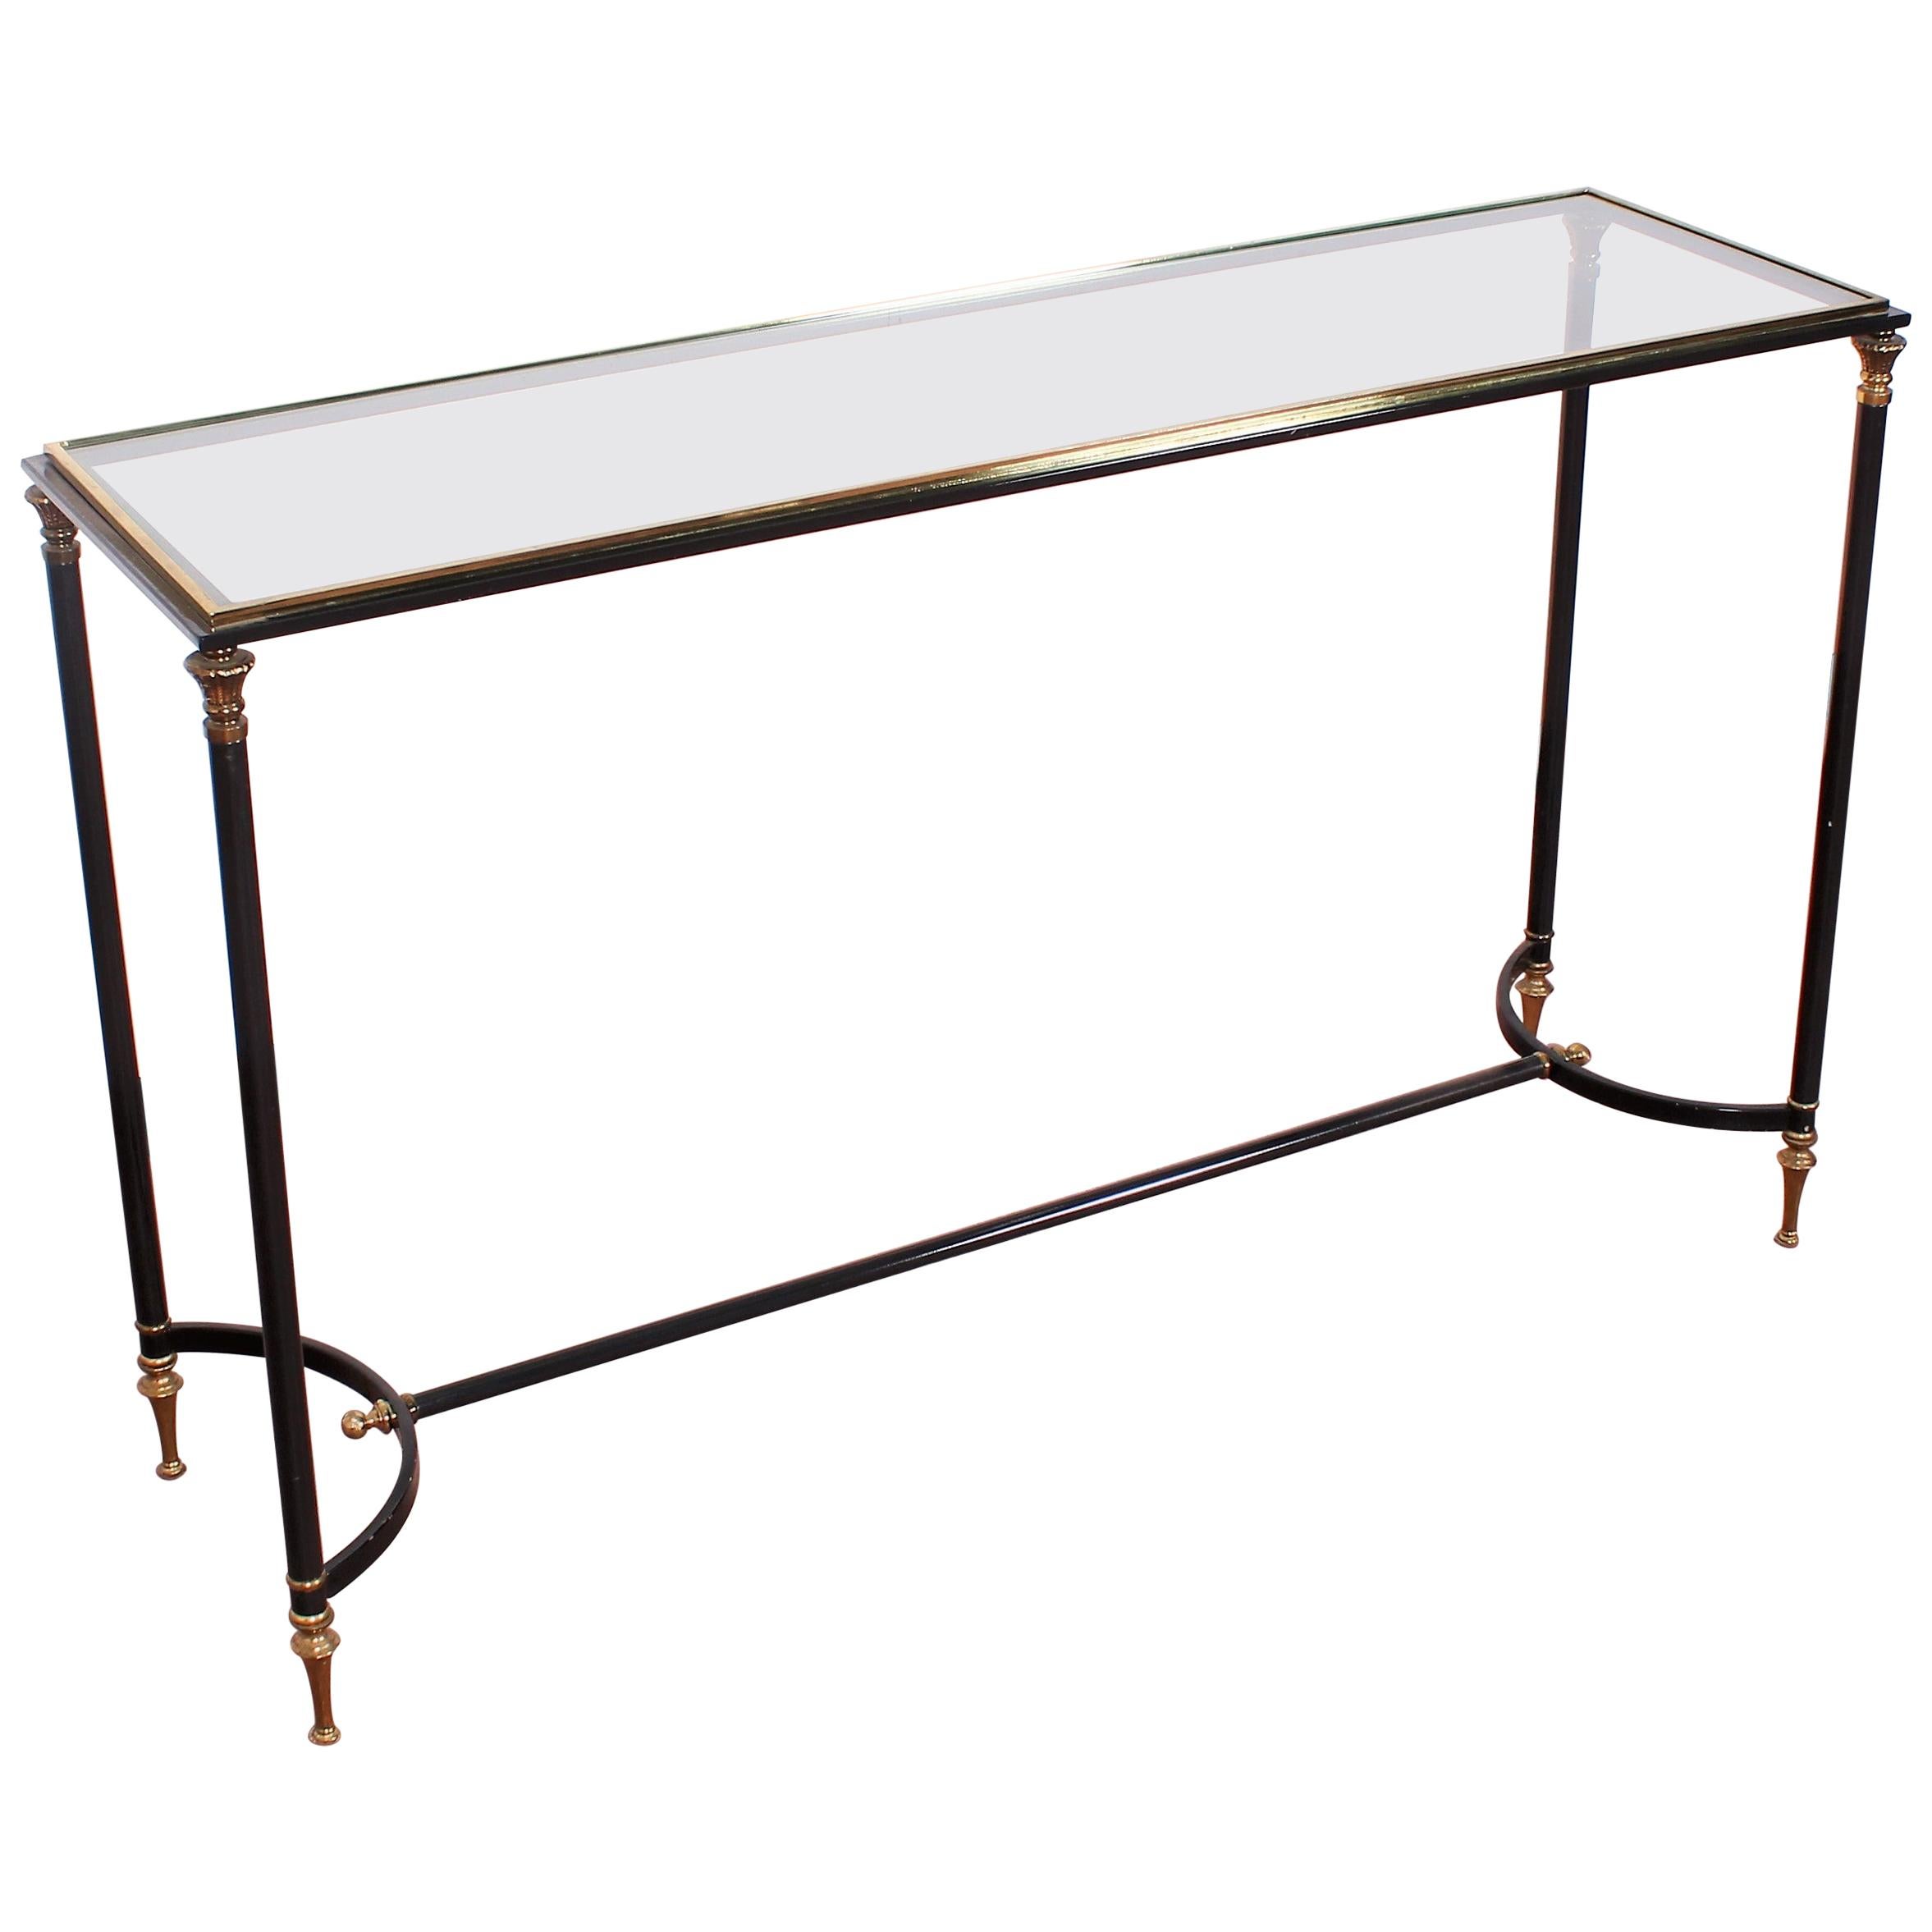 Maison Jansen Midcentury Brass and Glass Console Table, 1970s, France